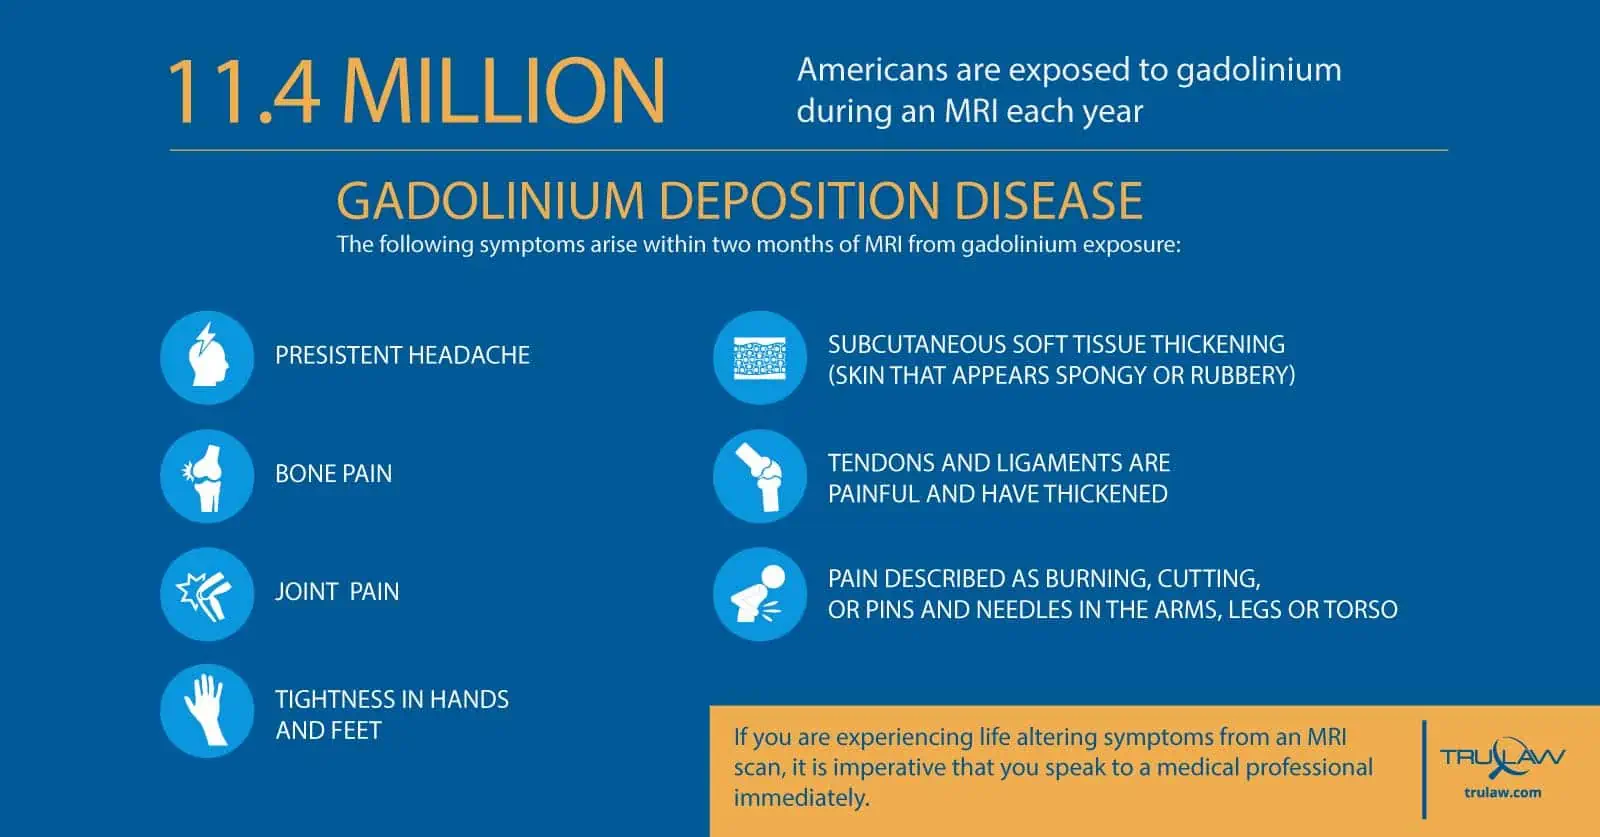 Symptoms of gadolinium exposure suffered by 11 Million Americans each year